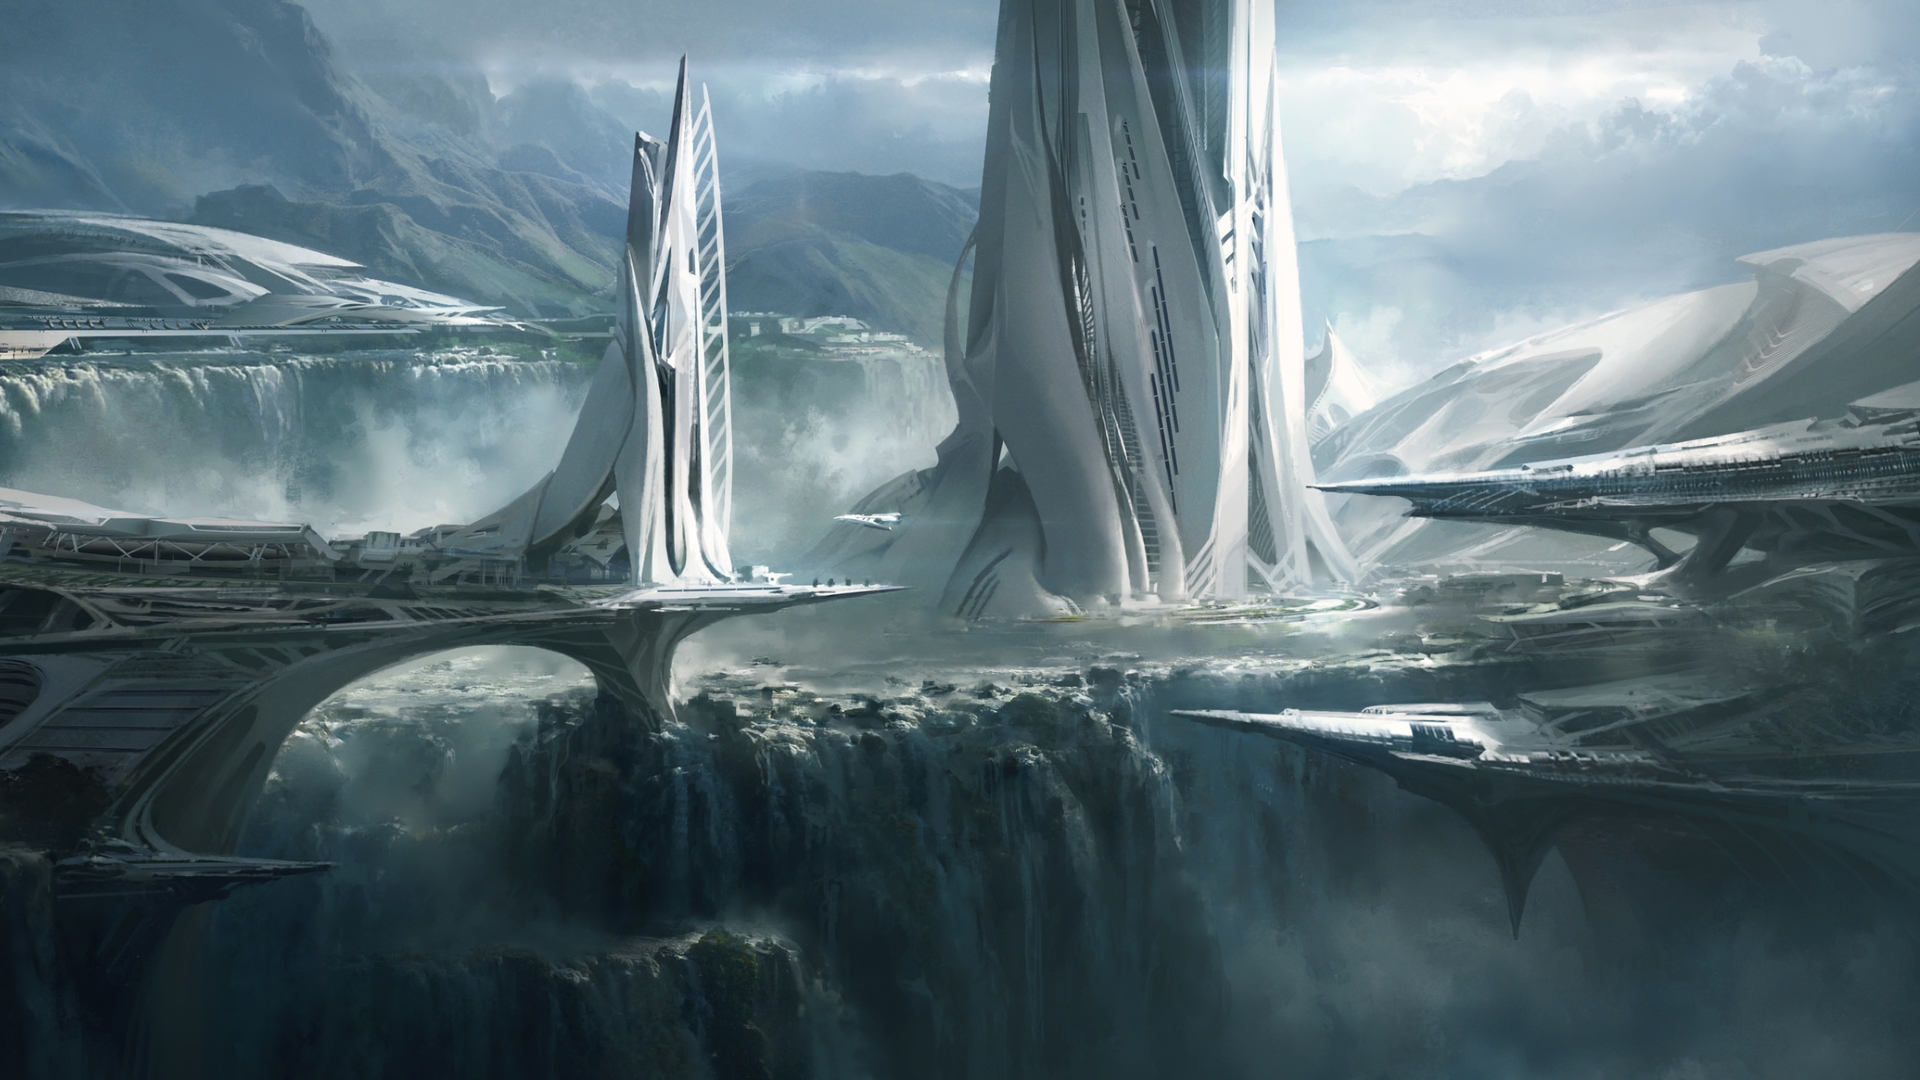 General 1920x1080 artwork science fiction fantasy art mountains fantasy city clouds waterfall